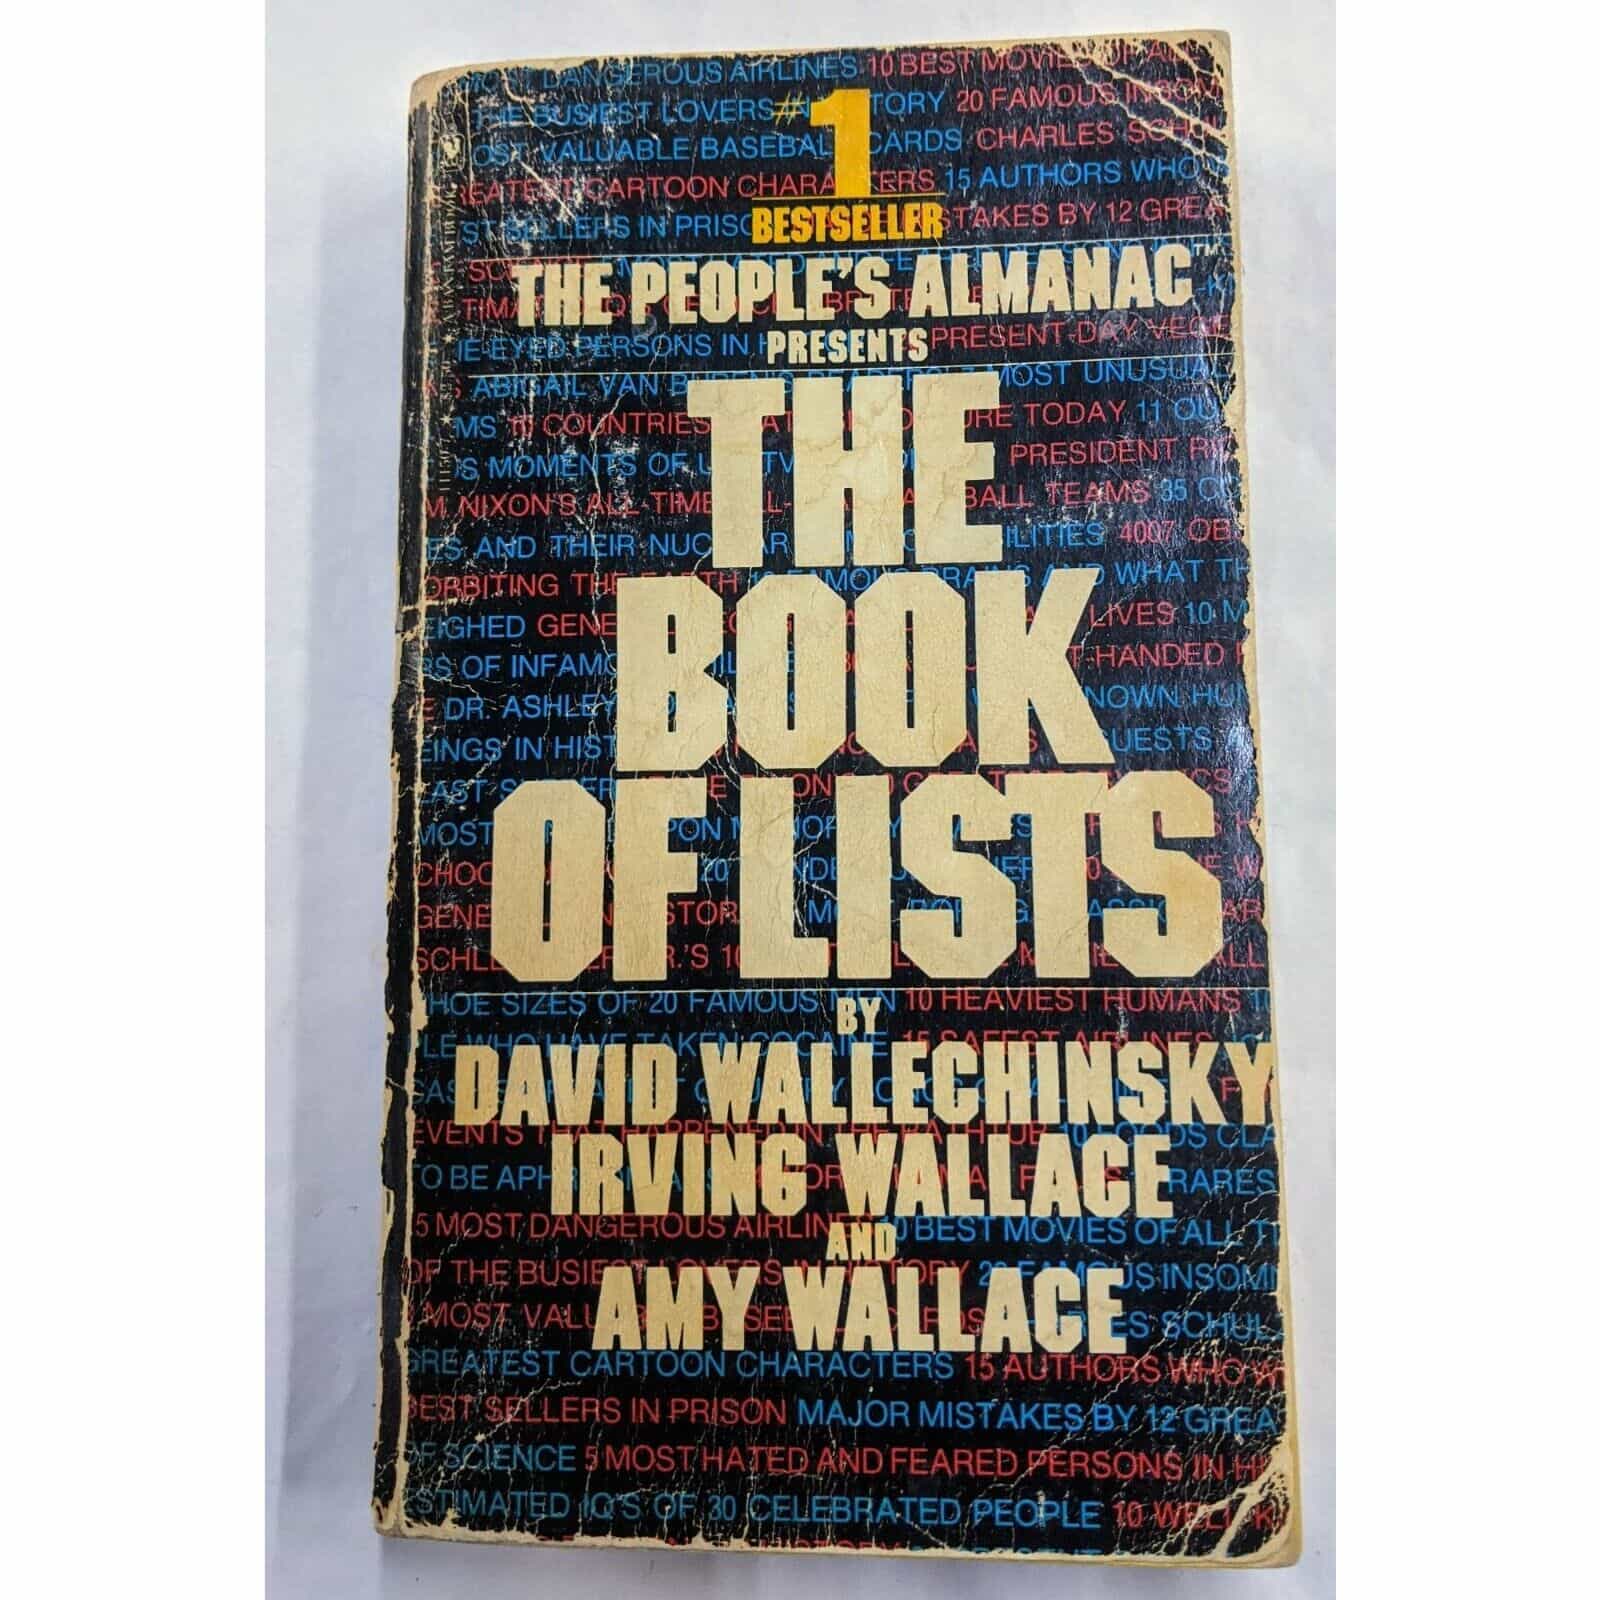 The Book of Lists by David Wallechinsky Vintage Book